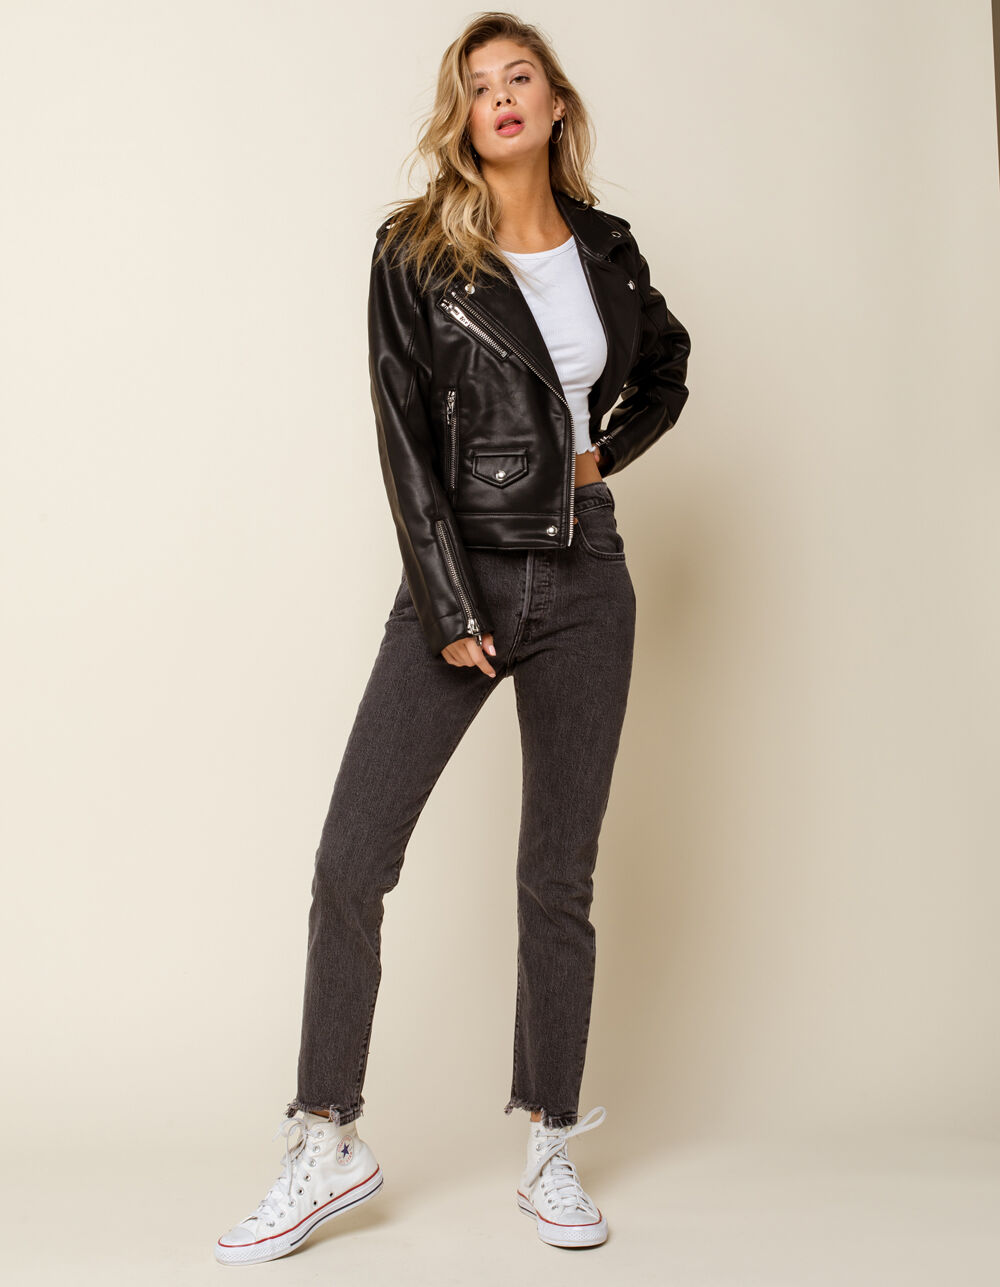 BLANK NYC In Plain Sight Womens Moto Jacket image number 4